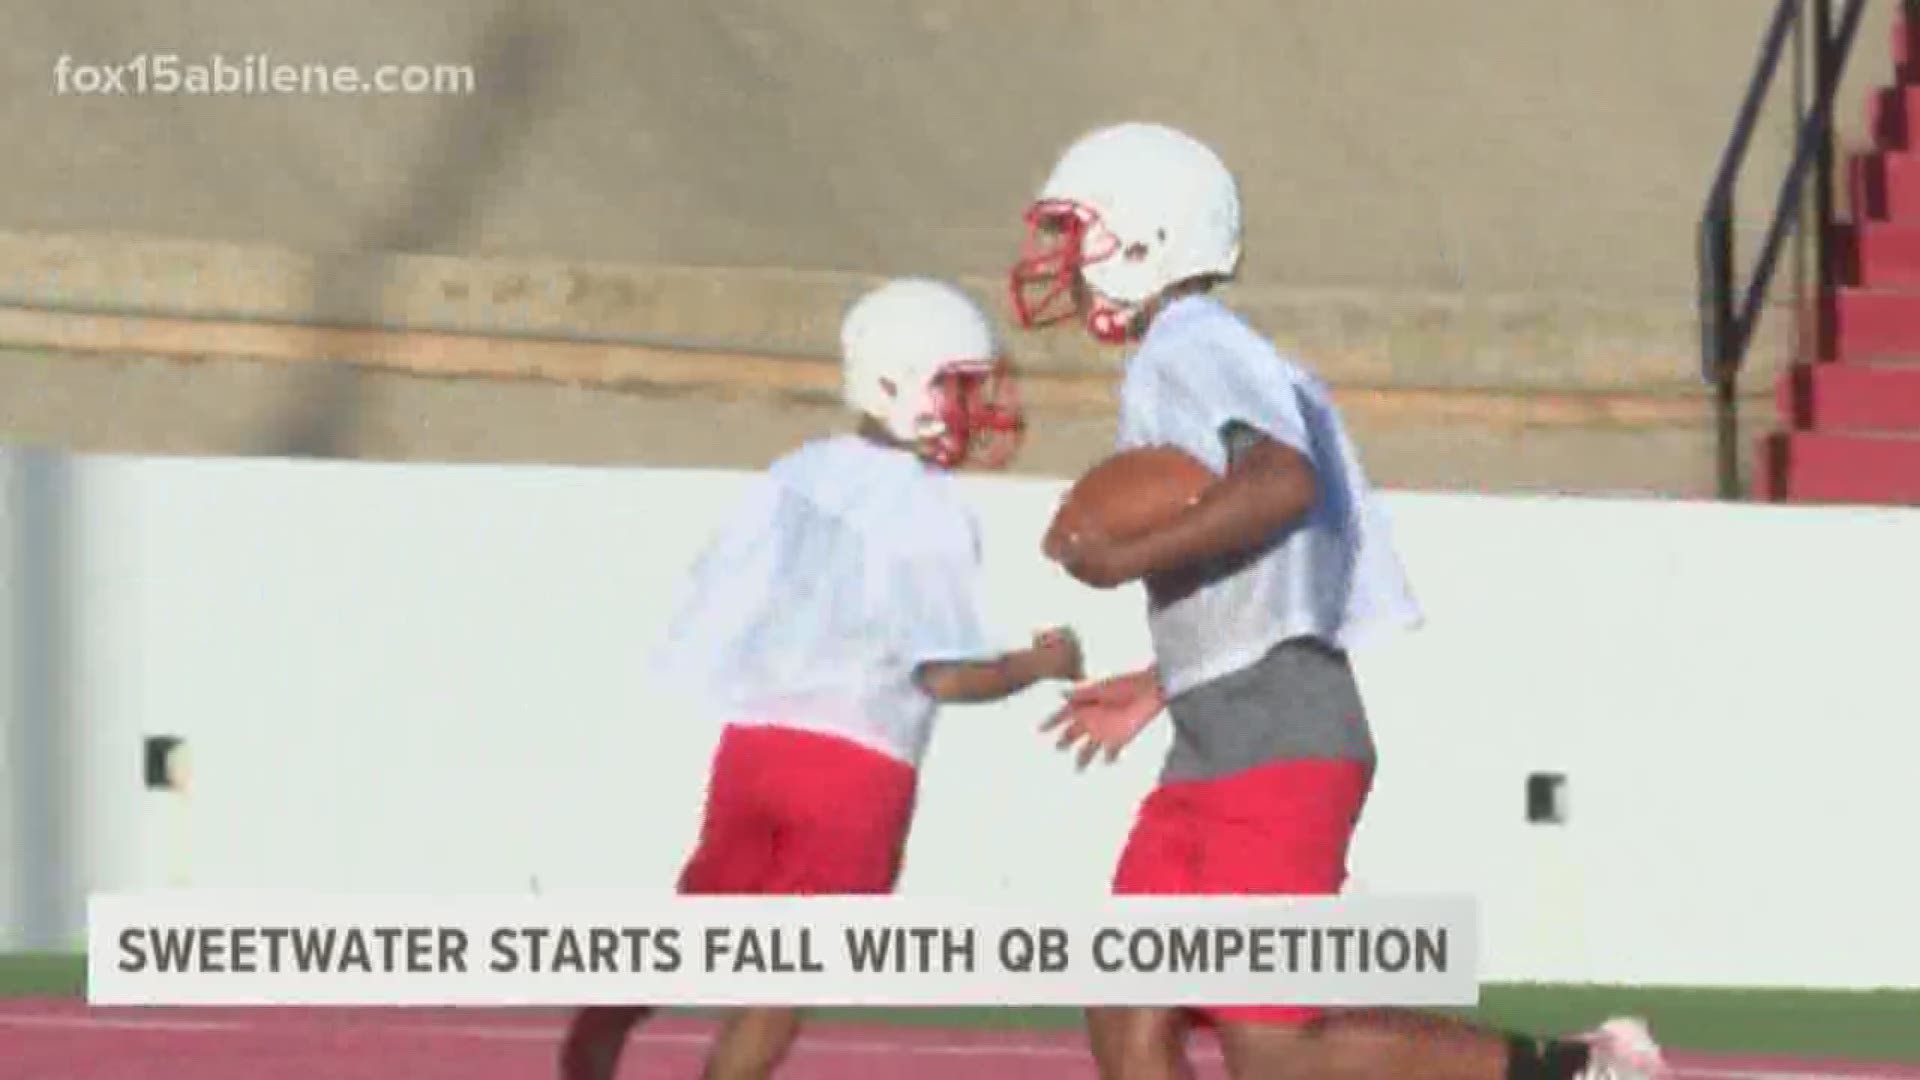 A new starting man will be under center when the Sweetwater Mustangs kick off the season. A pair of young passers have their chance to take over.